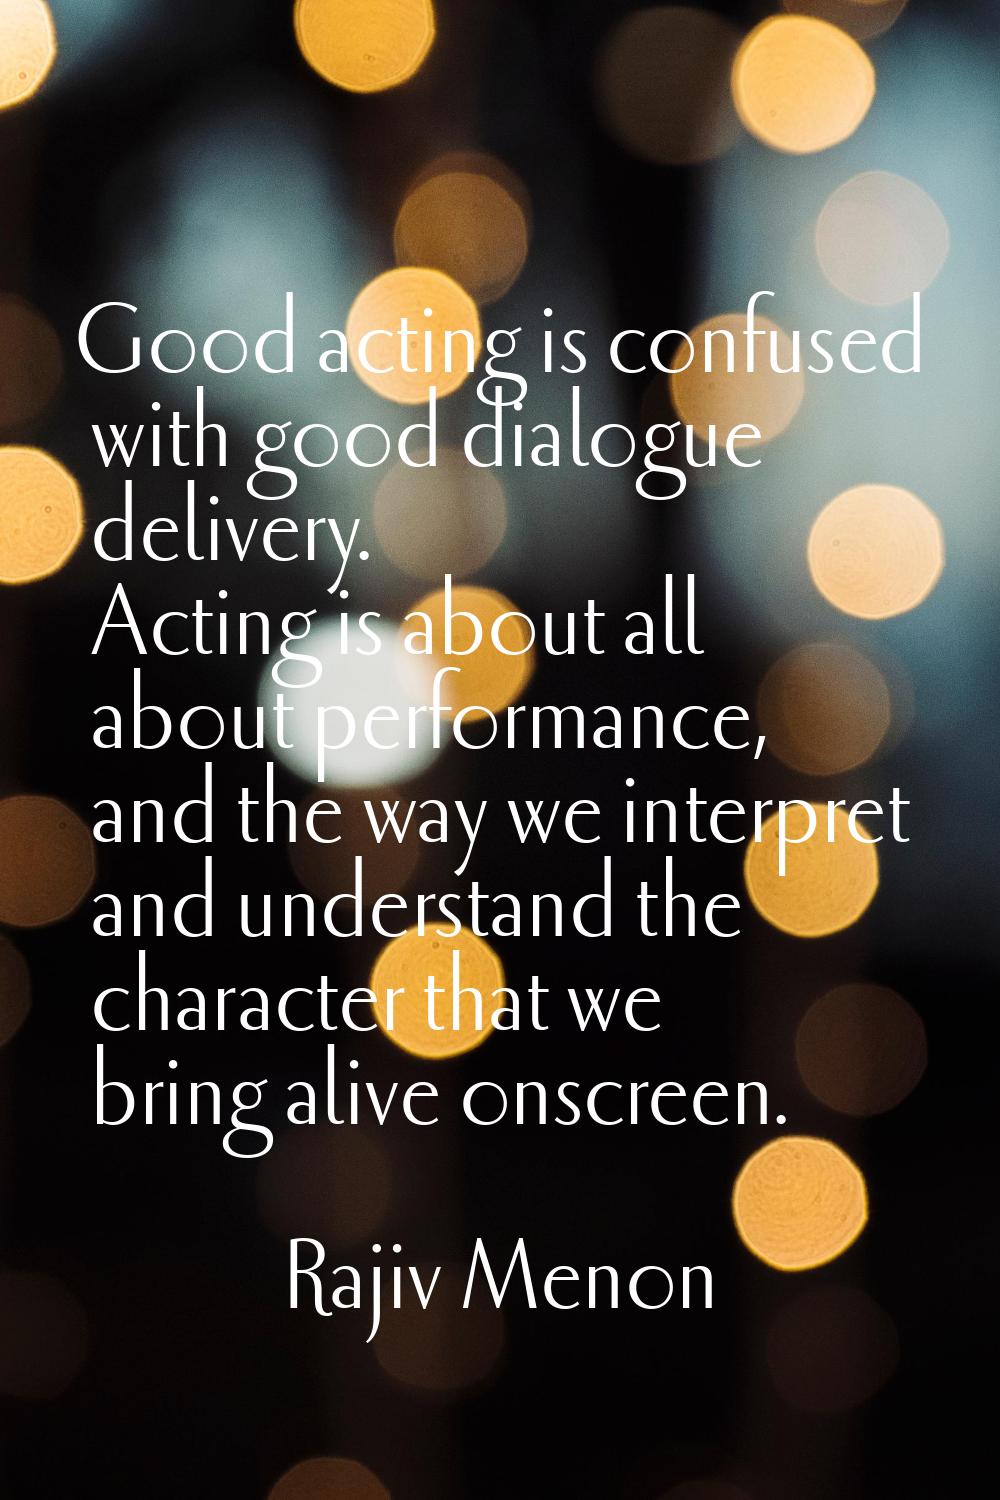 Good acting is confused with good dialogue delivery. Acting is about all about performance, and the